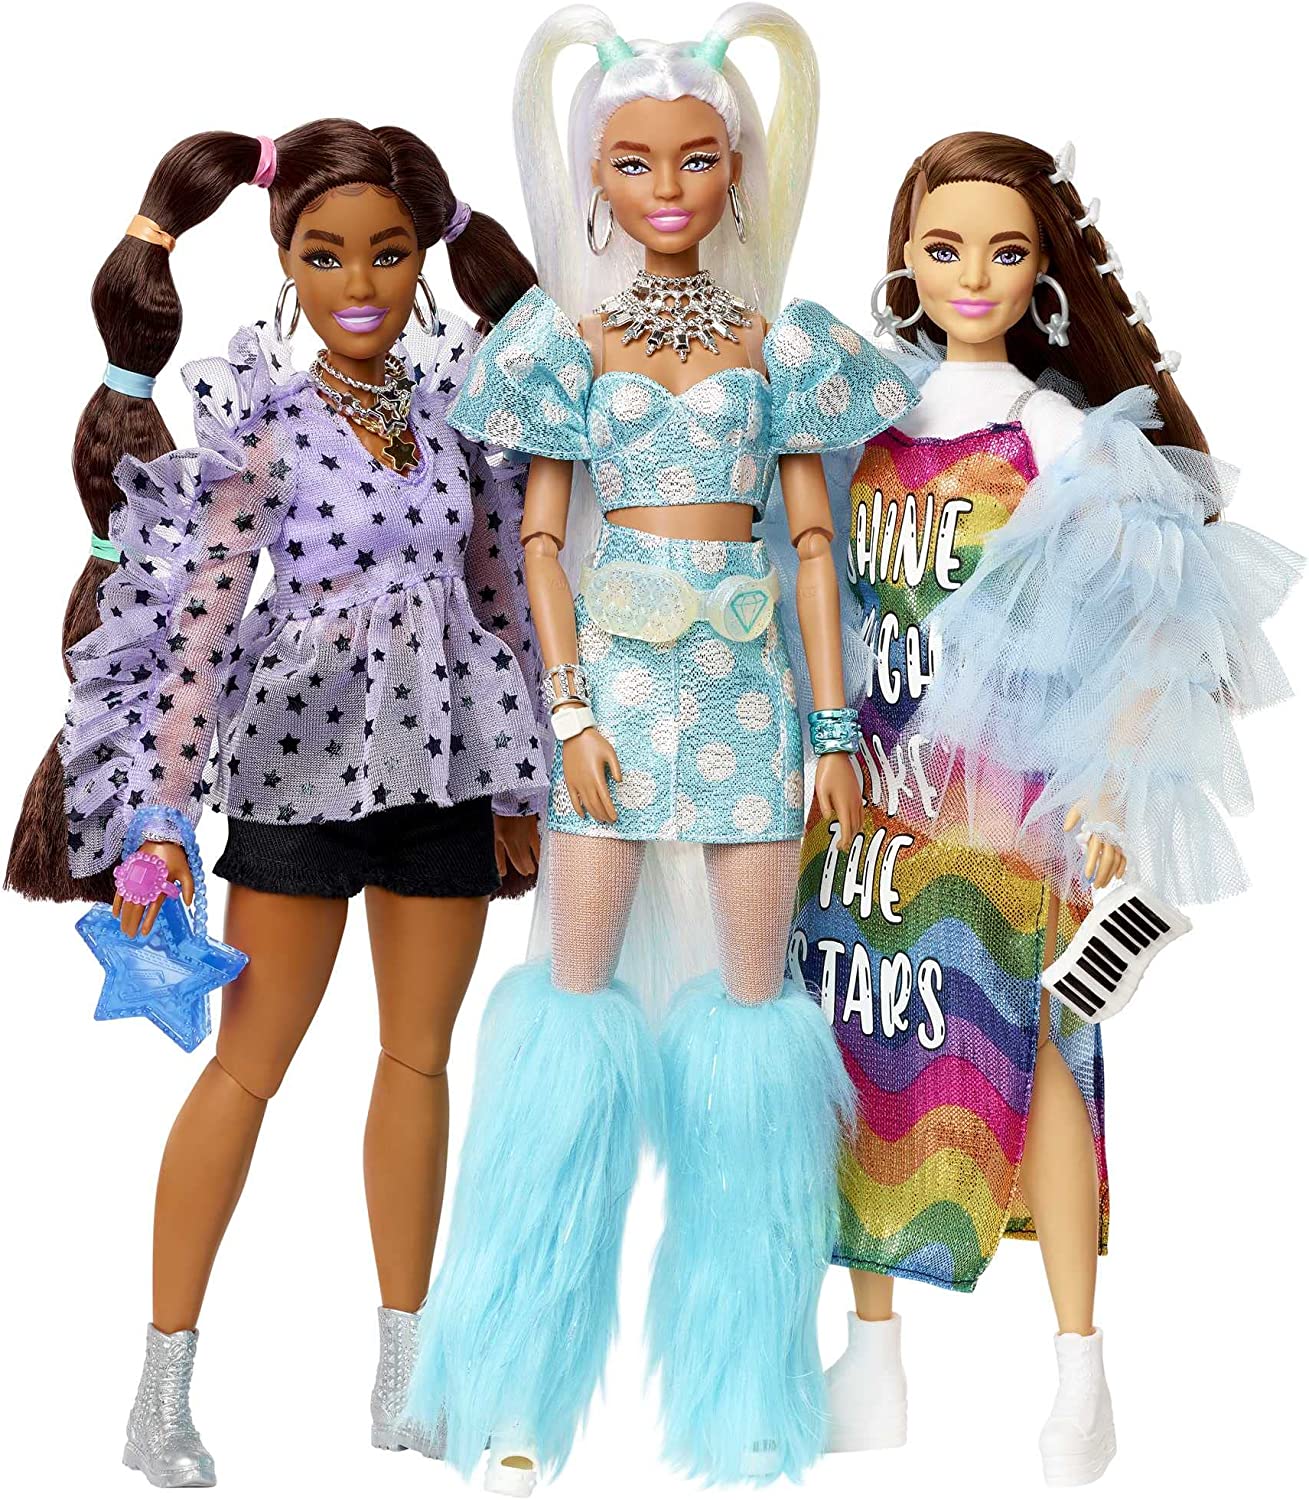 Barbie Extra Doll & Accessories Set With Mix & Match Pieces For 30+ Looks